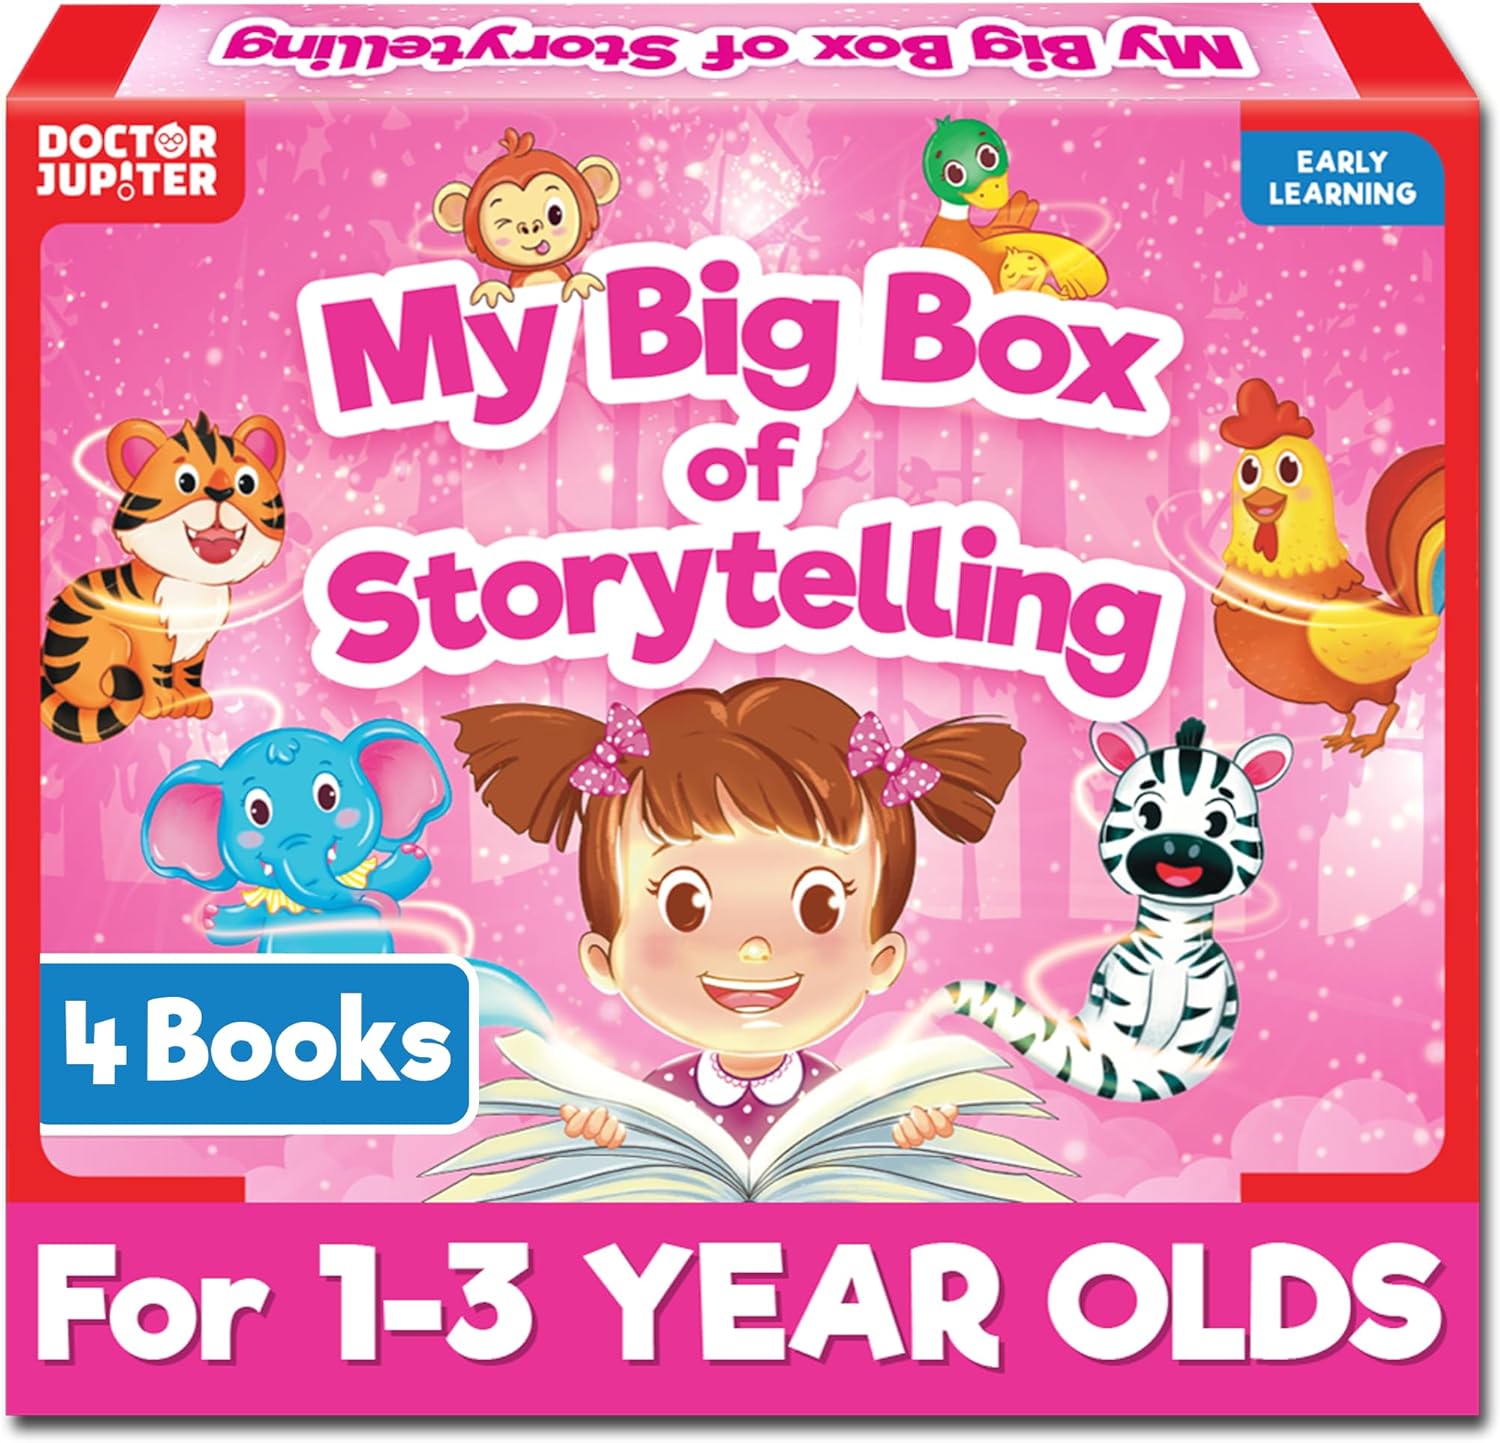 My Big Box of Storytelling: An Engaging and Educational Adventure for Toddlers